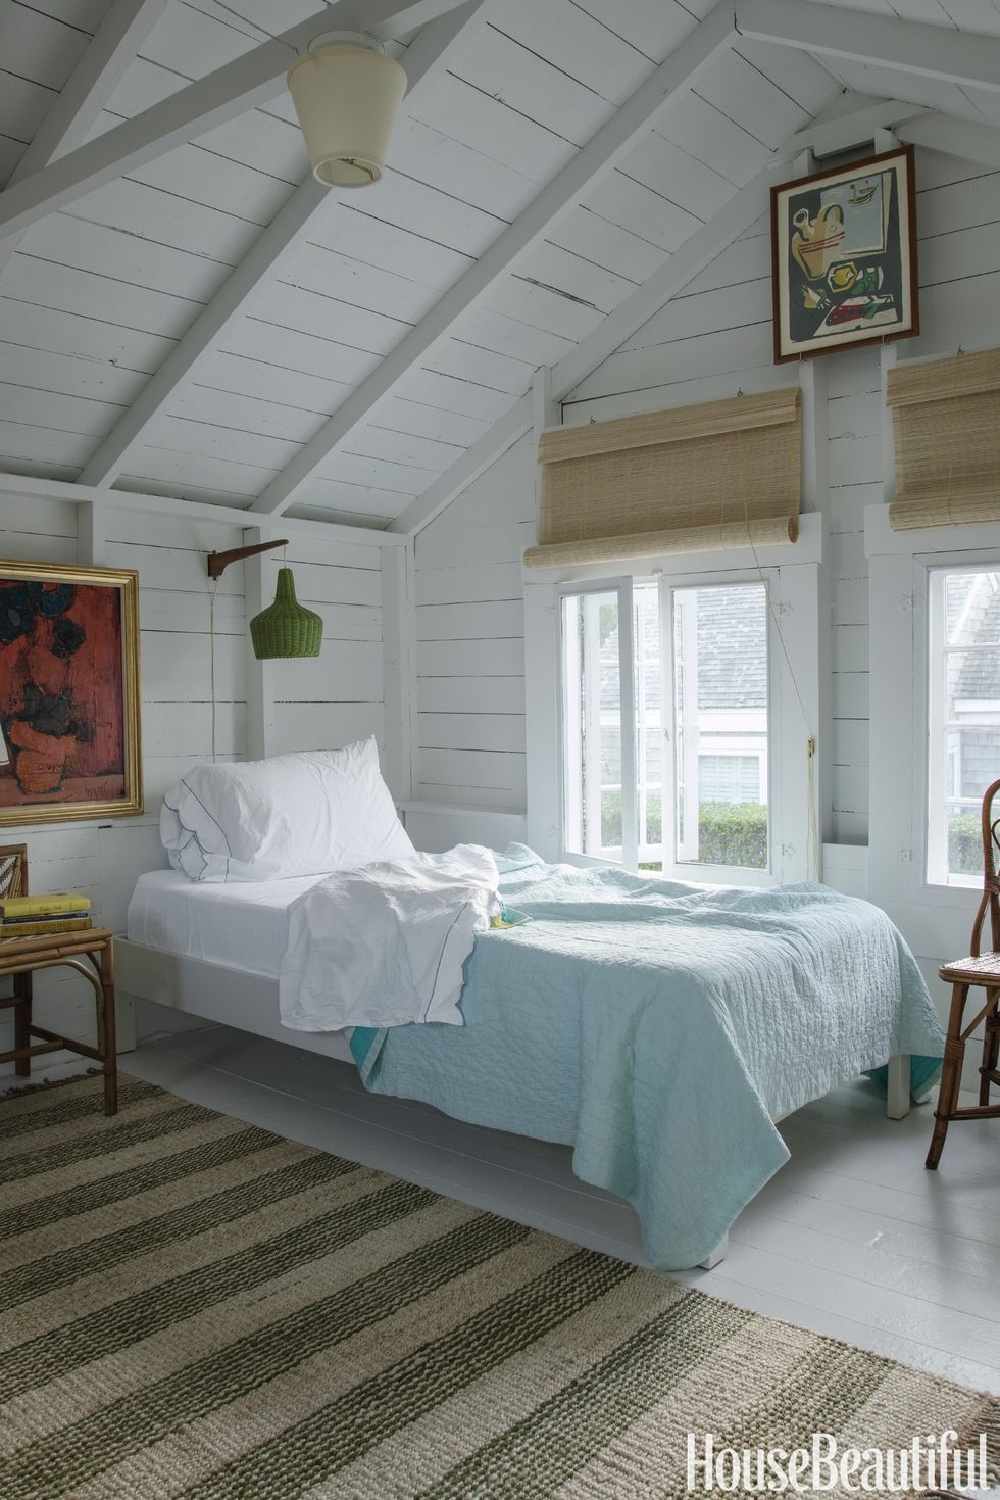 Tranquil bedroom in a rustic Nantucket cottage. COME TOUR MORE Nantucket Style Chic & Summer Vibes! #nantucket #interiordesign #designinspiration #summerliving #coastalstyle